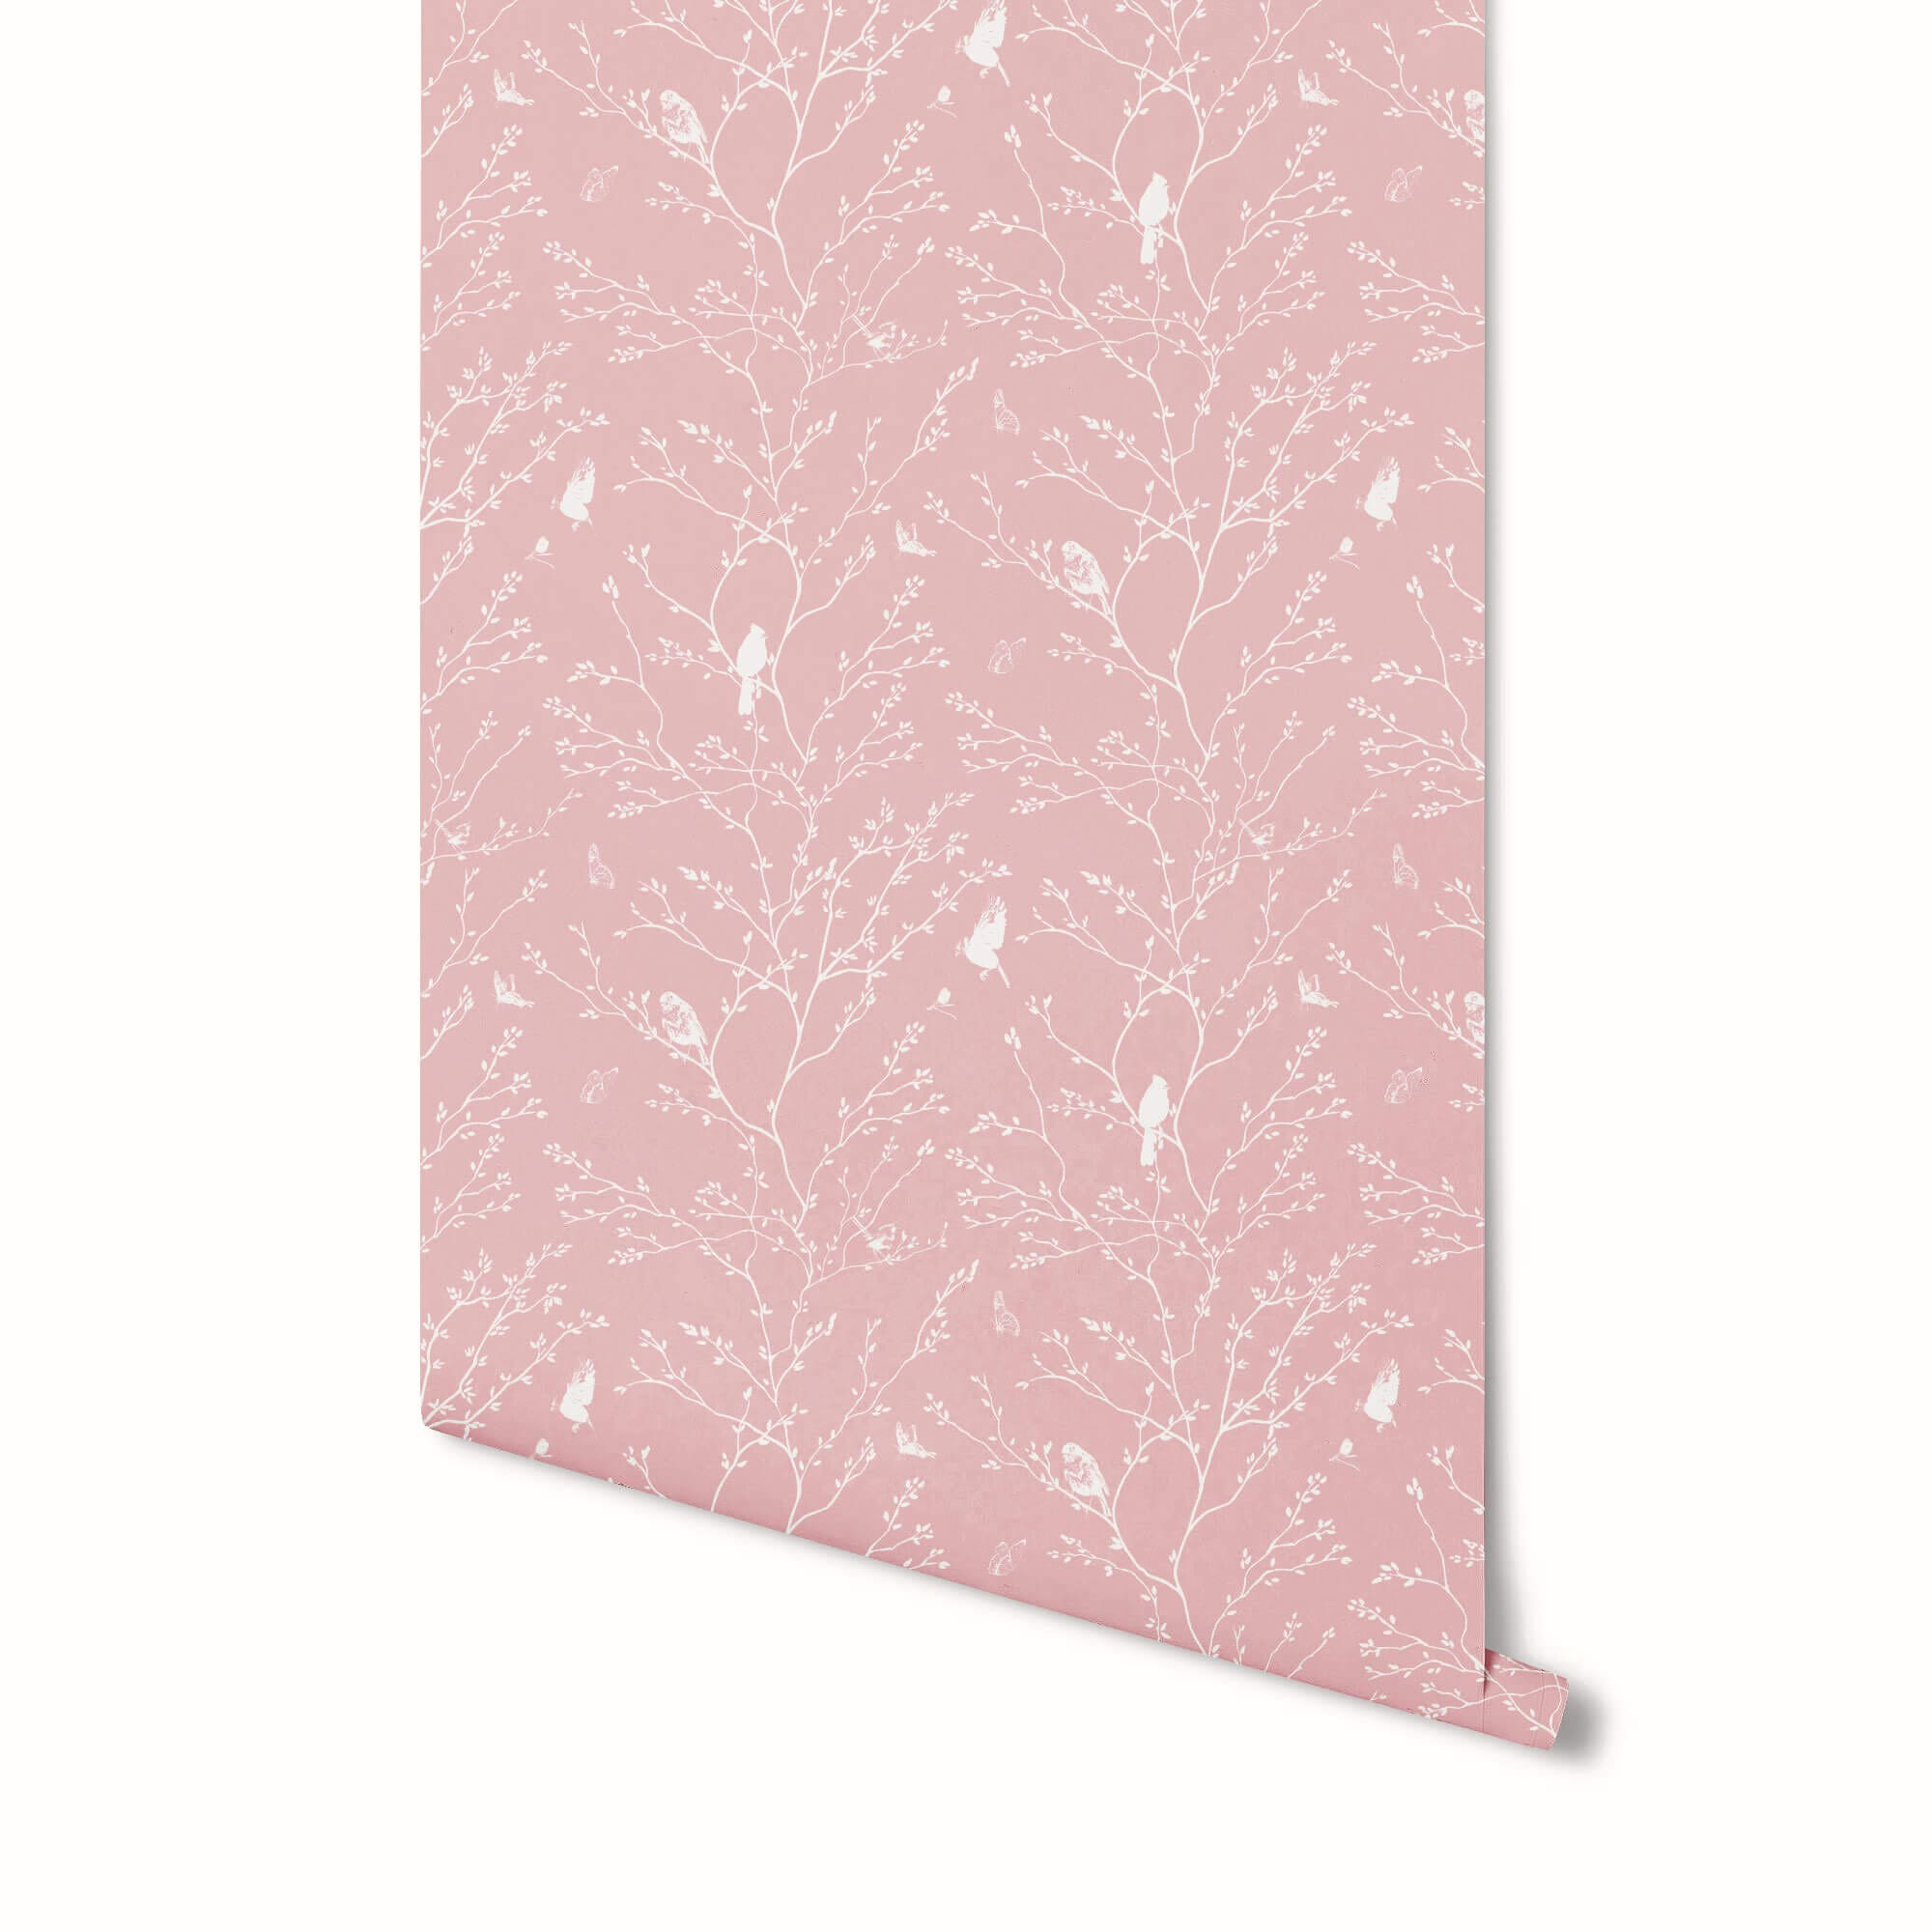 Branches Reverse Wallpaper in Blush